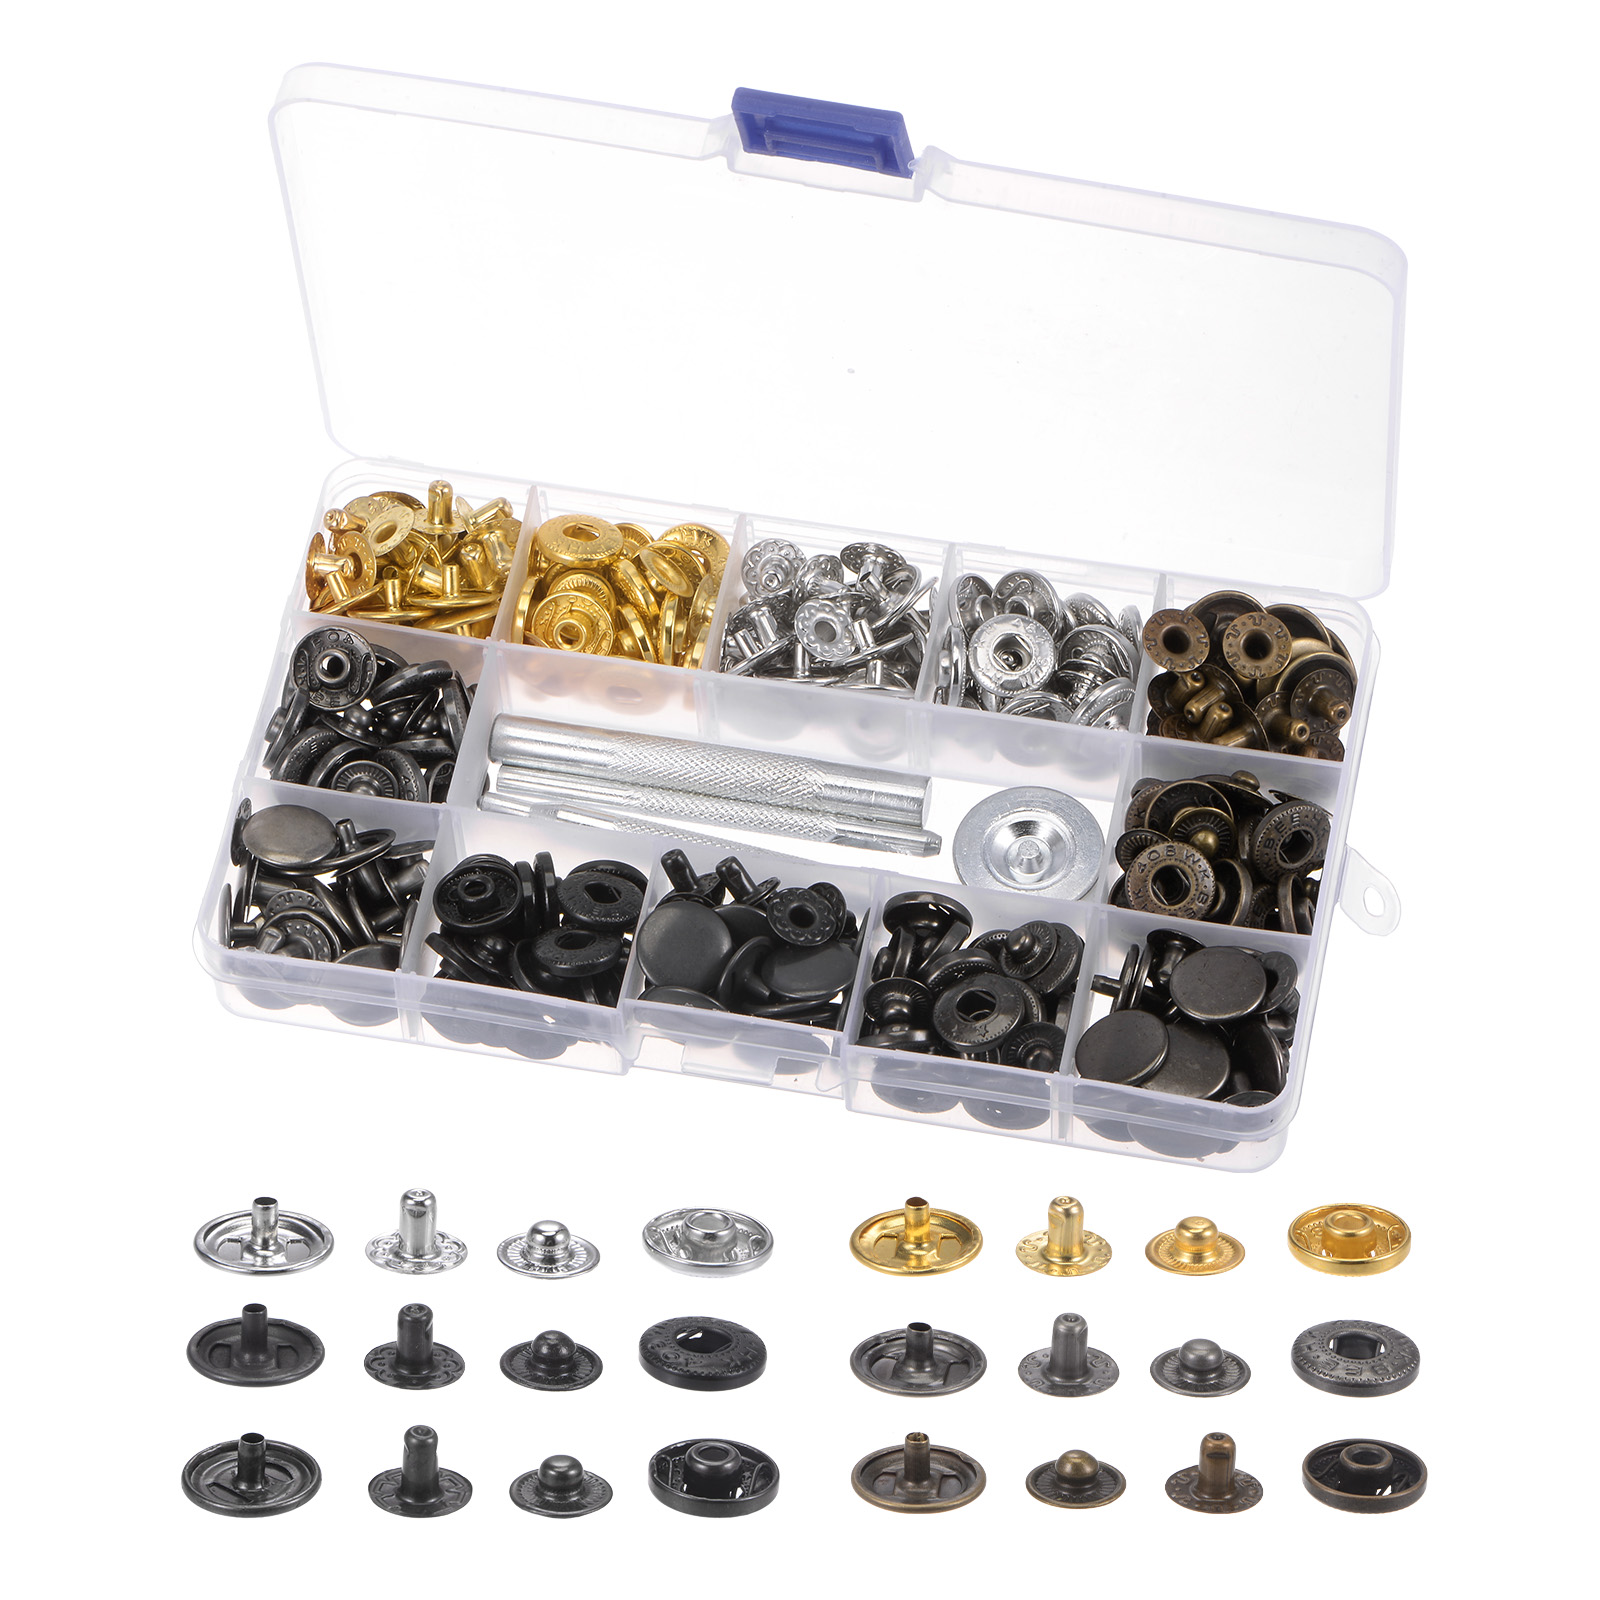 Unique Bargains 90 Sets Snap Fasteners Kit 15mm with 3 Setter Tools & Storage Box for Clothing